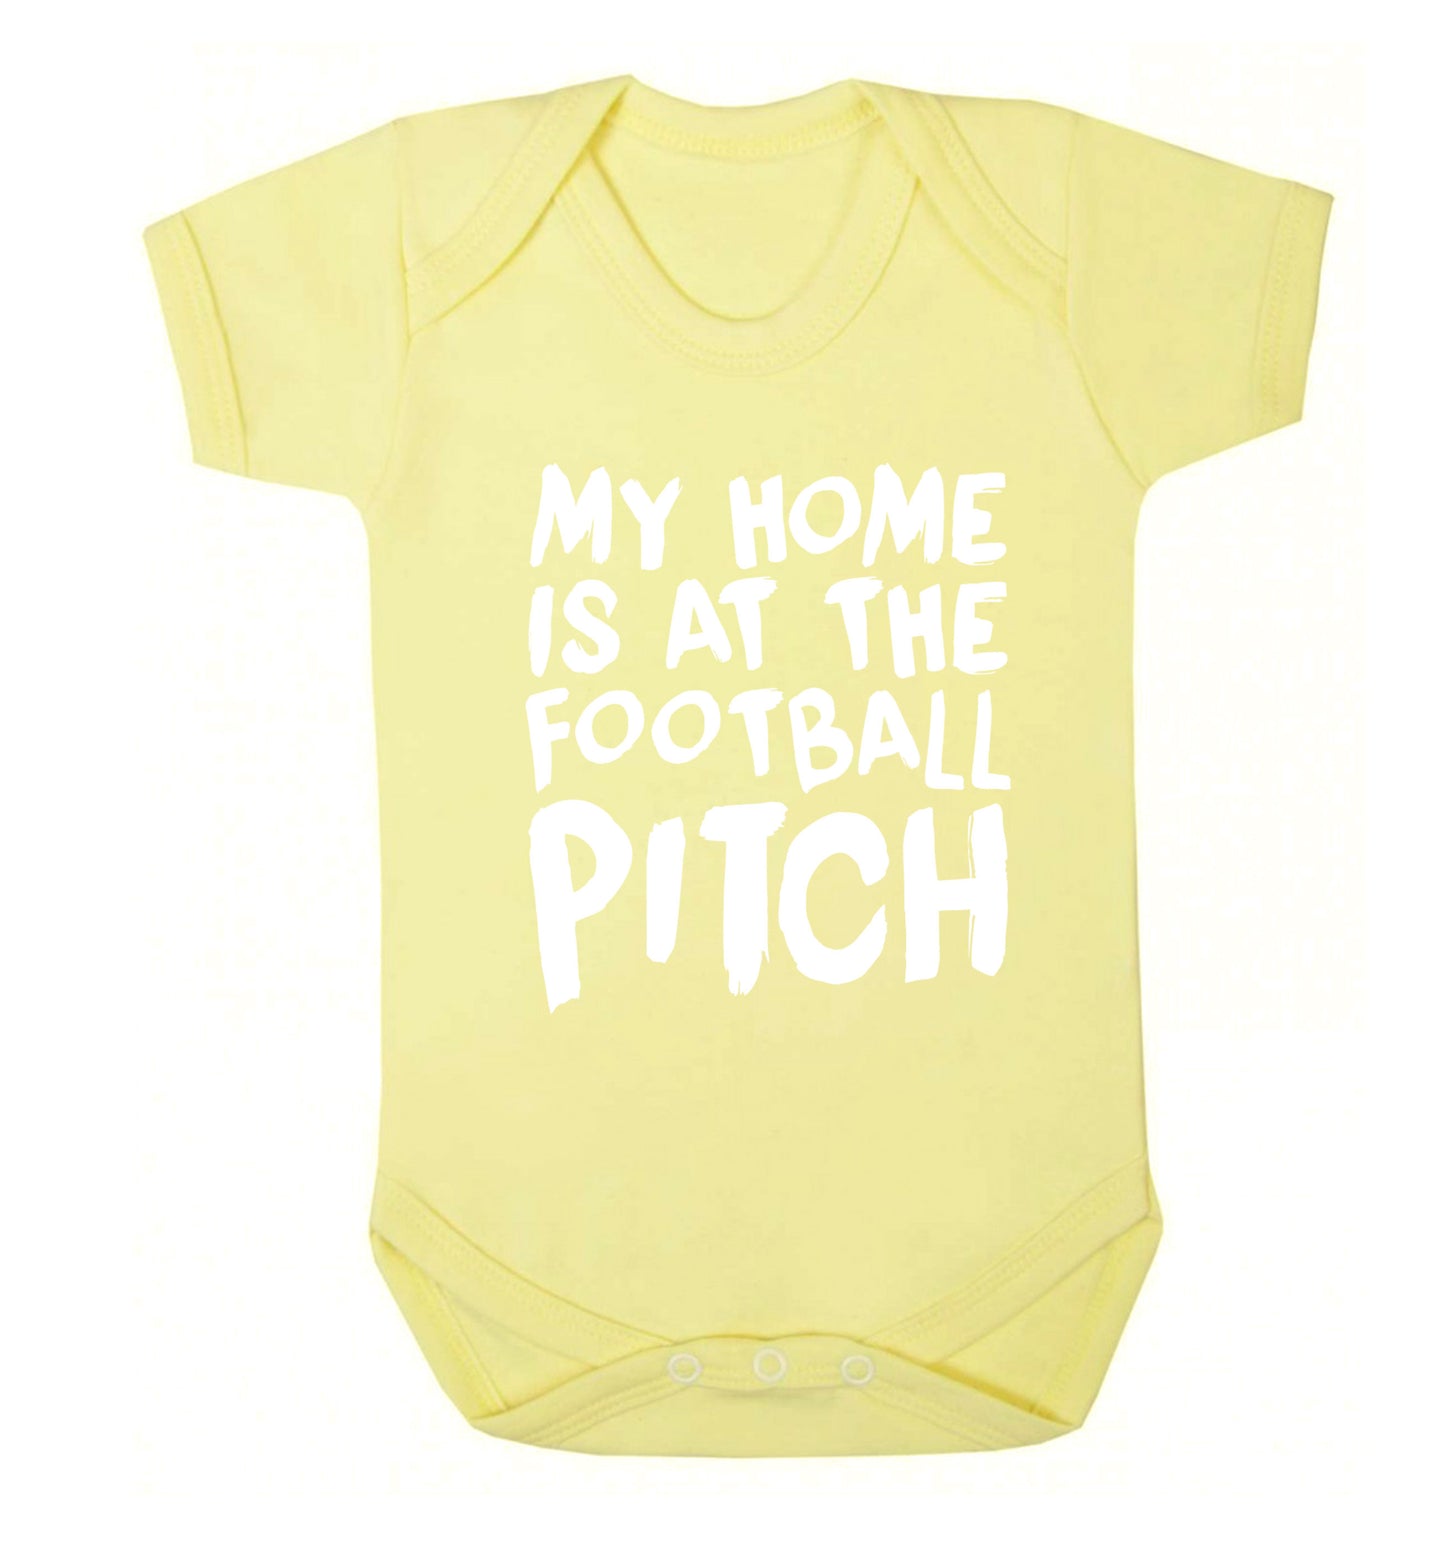 My home is at the football pitch Baby Vest pale yellow 18-24 months